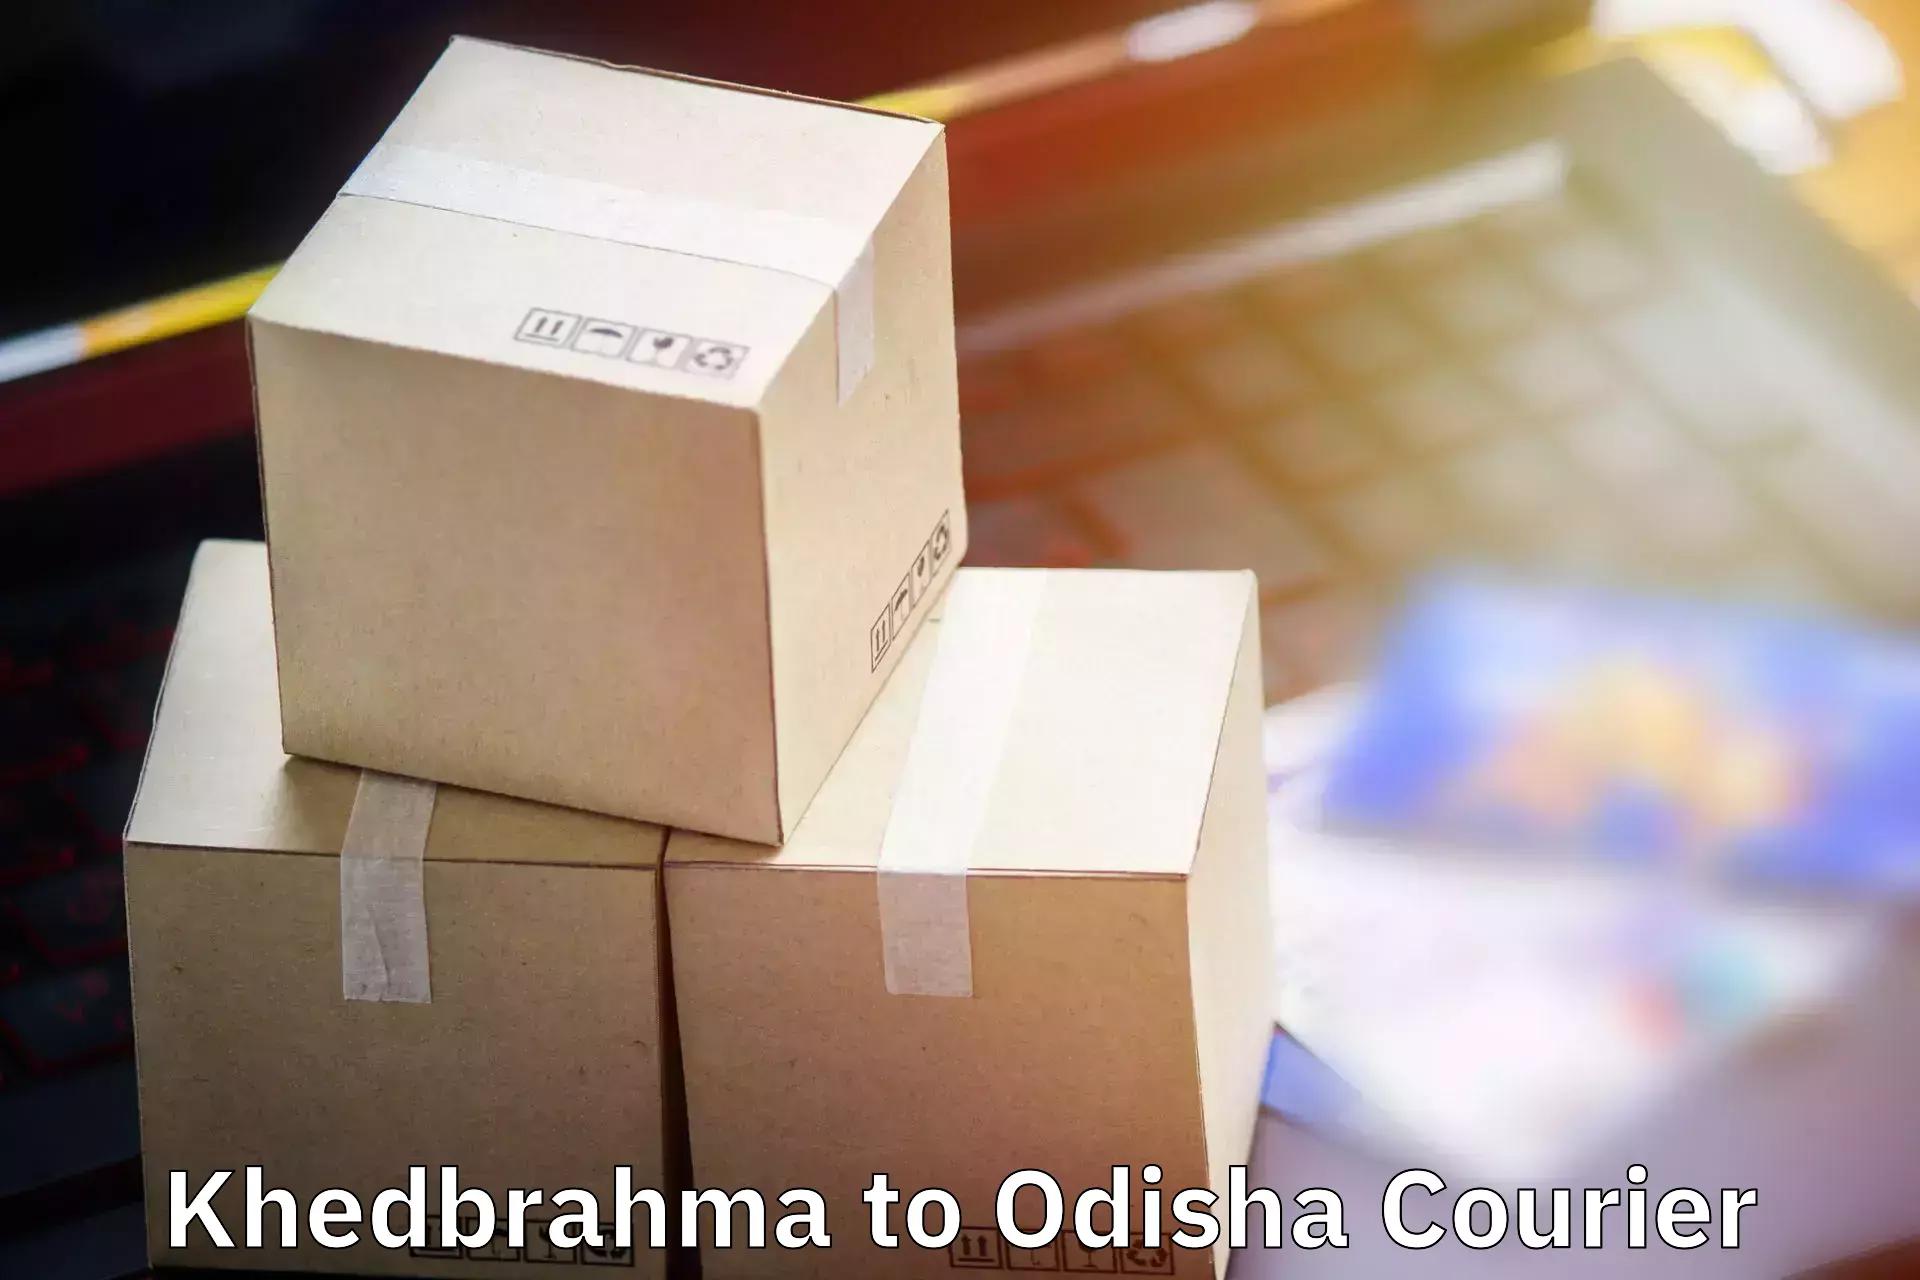 Luggage delivery rates in Khedbrahma to Dhamanagar